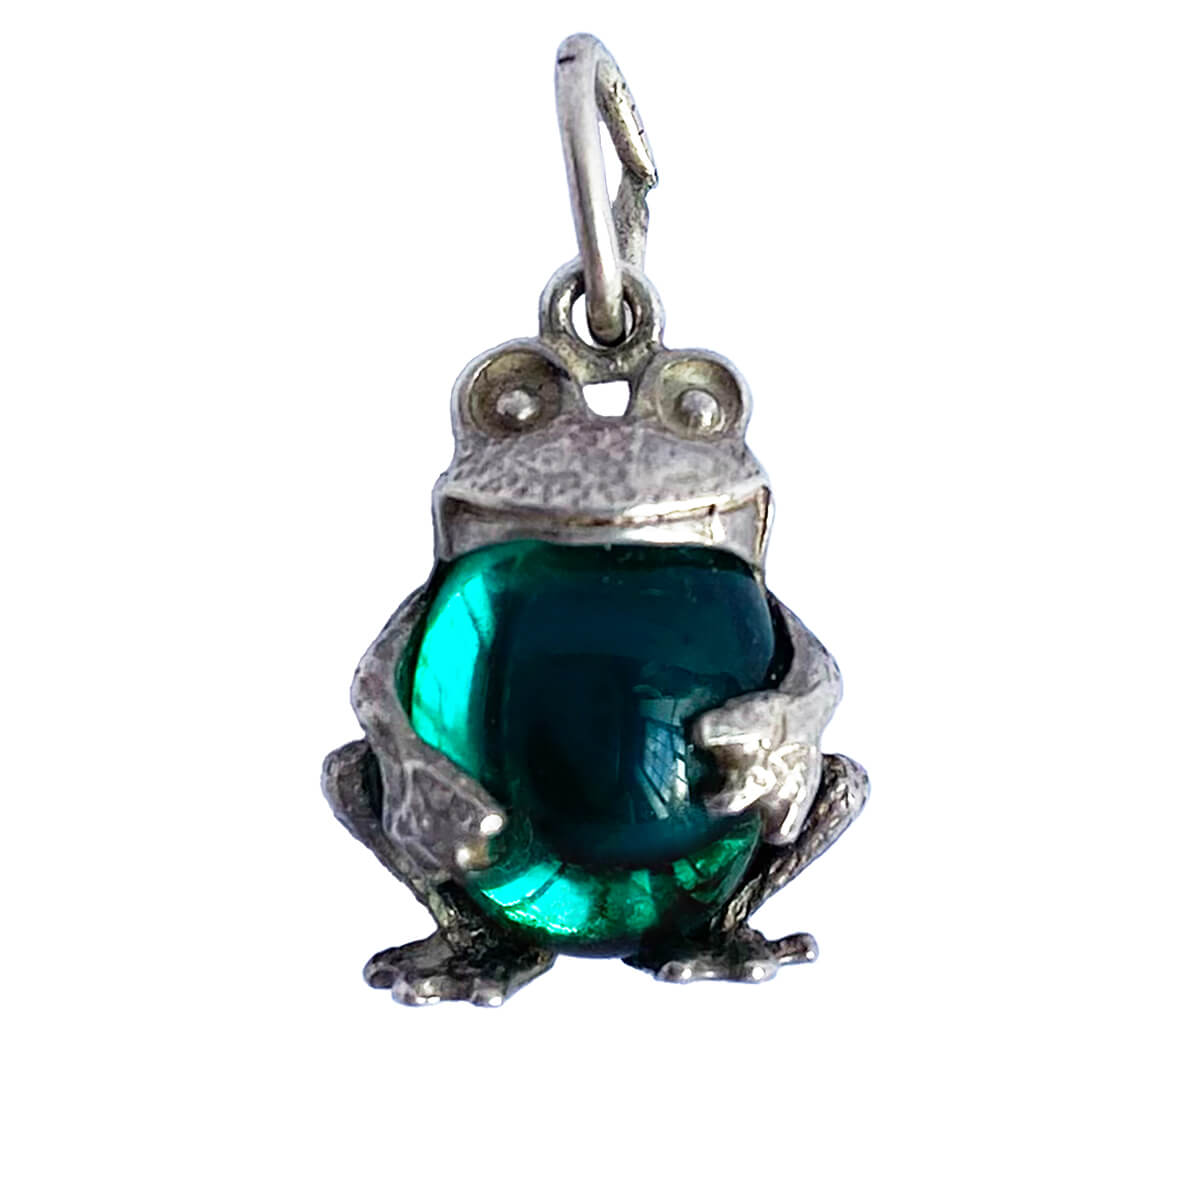 Vintage silver frog charm with green crystal belly